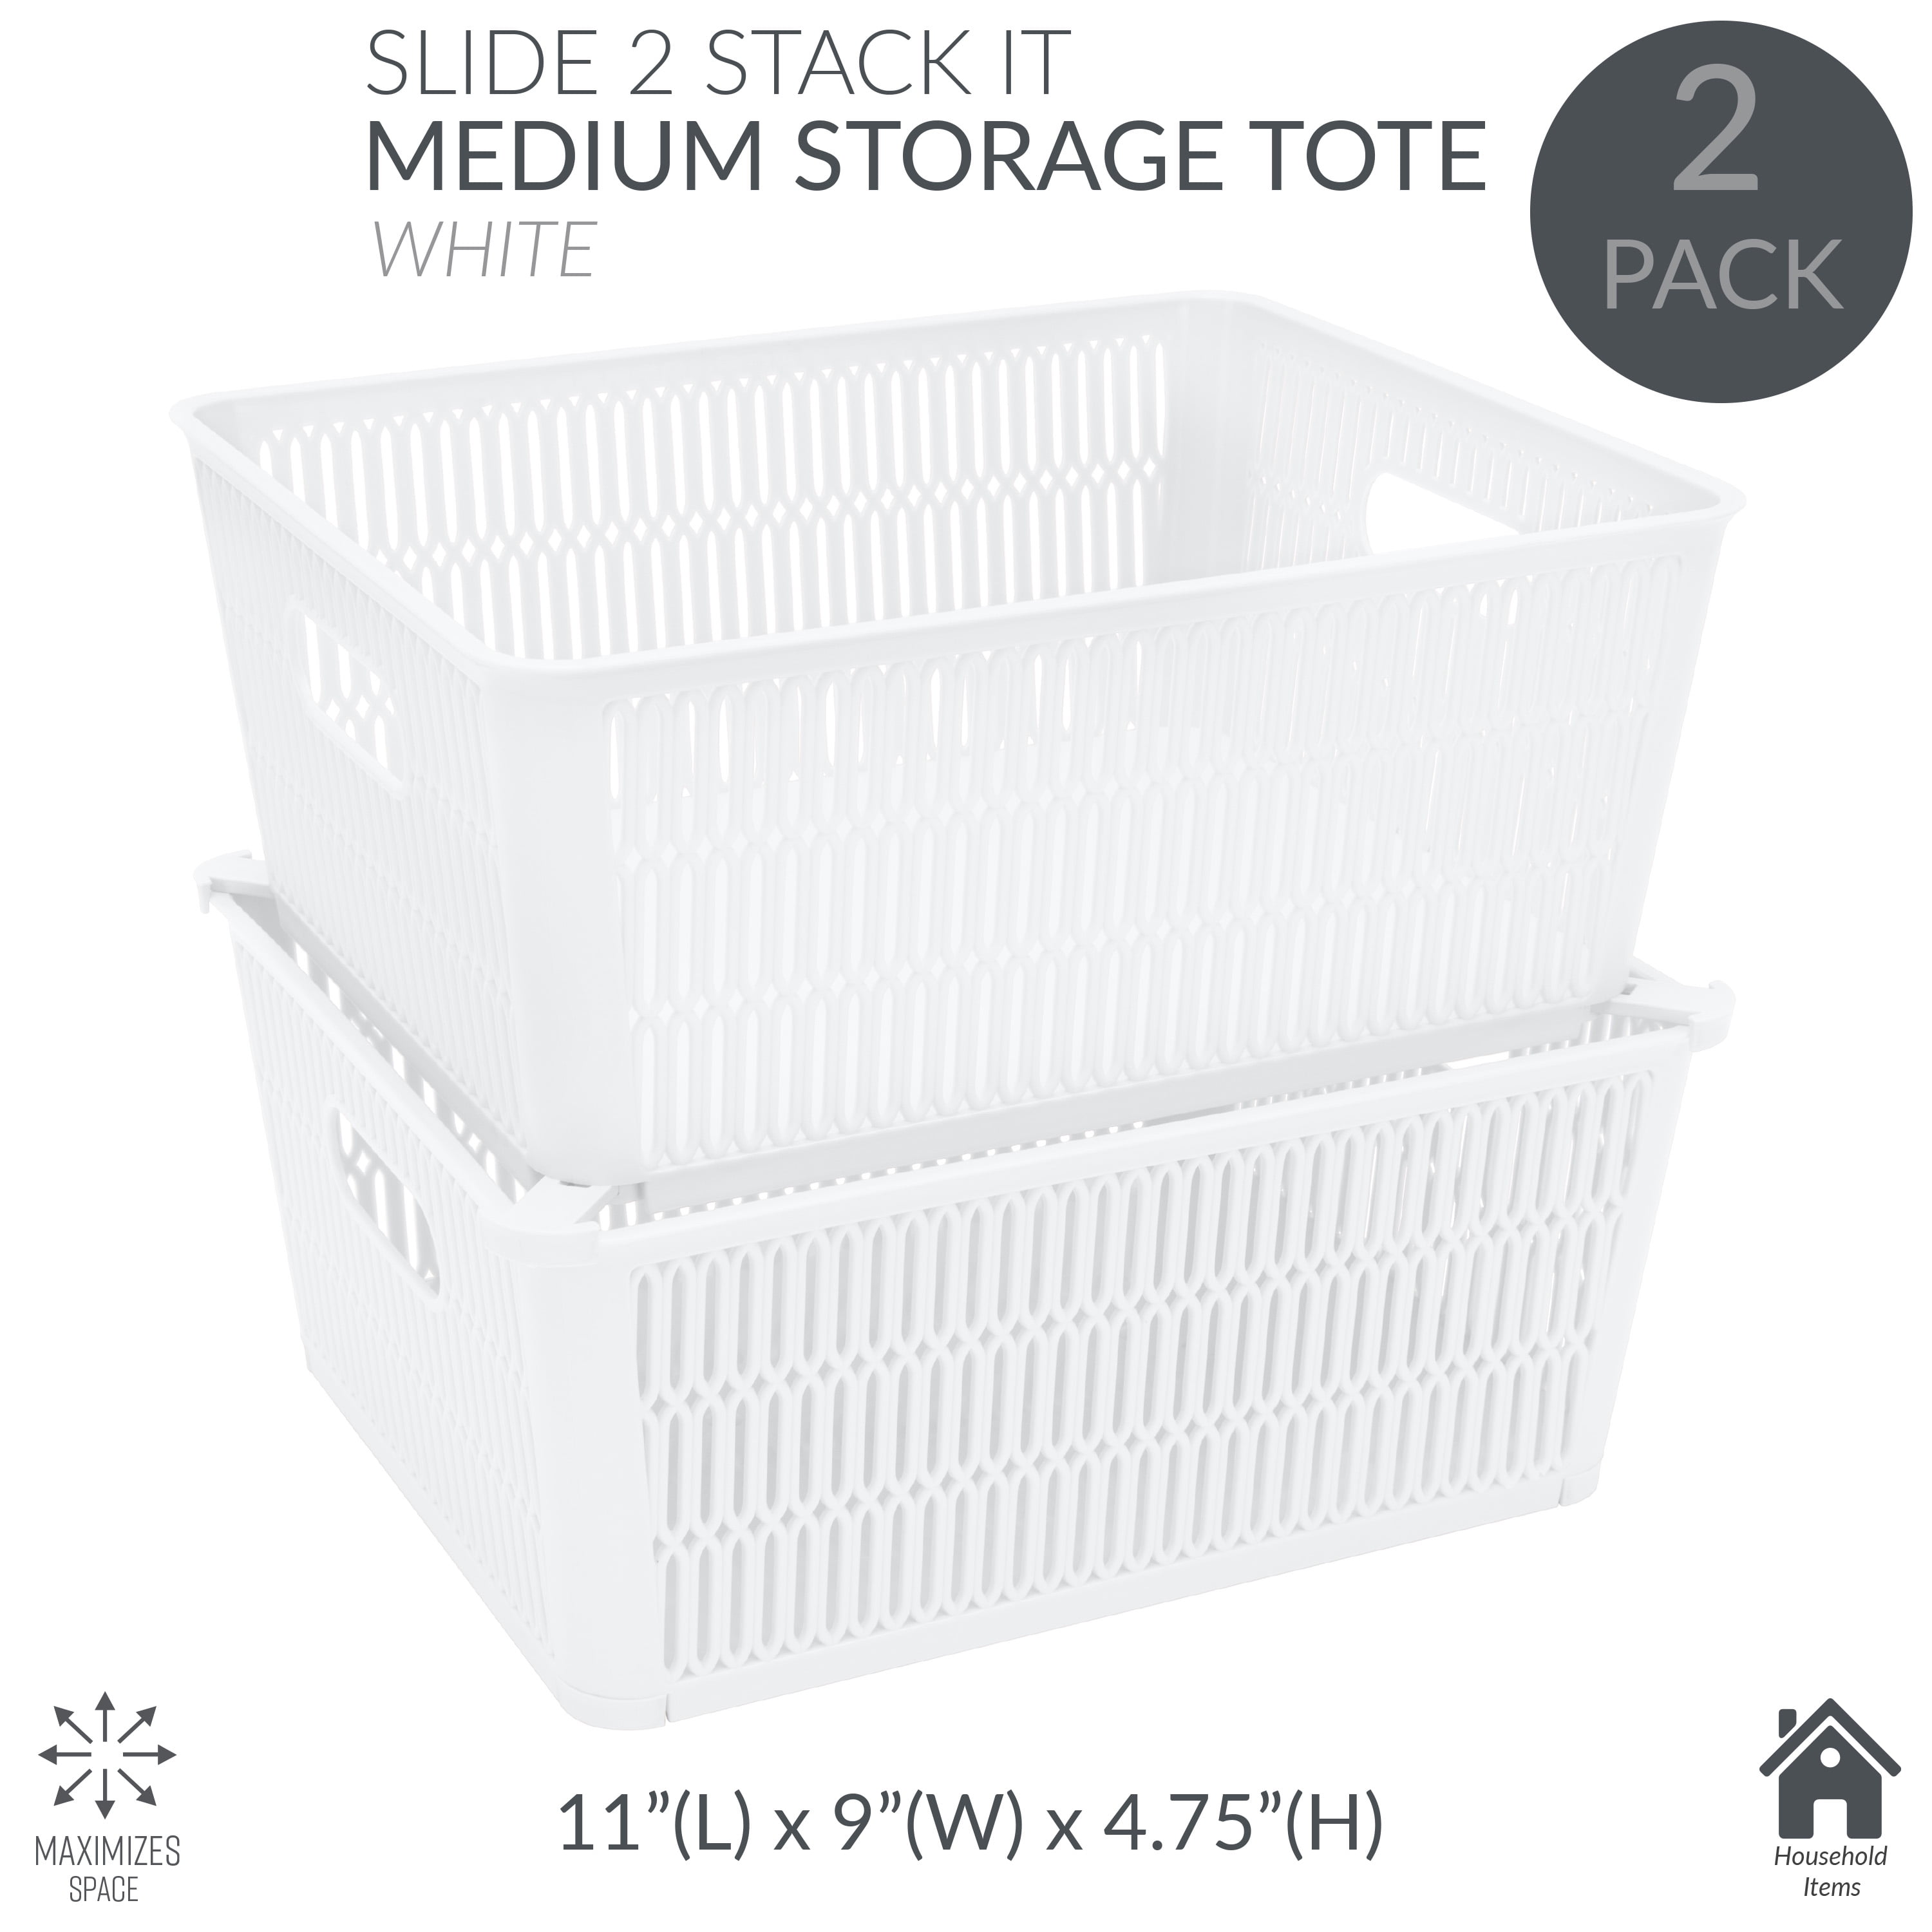  Organize Your Home Large Slide-It Baskets, 2 Pack, Stacking and  Sliding Modular Storage, Great Organizing Bins for Pantry, Closet, Bedroom,  Office, and all Storage, 19.2” x 12.5” x 7.5” : Home & Kitchen